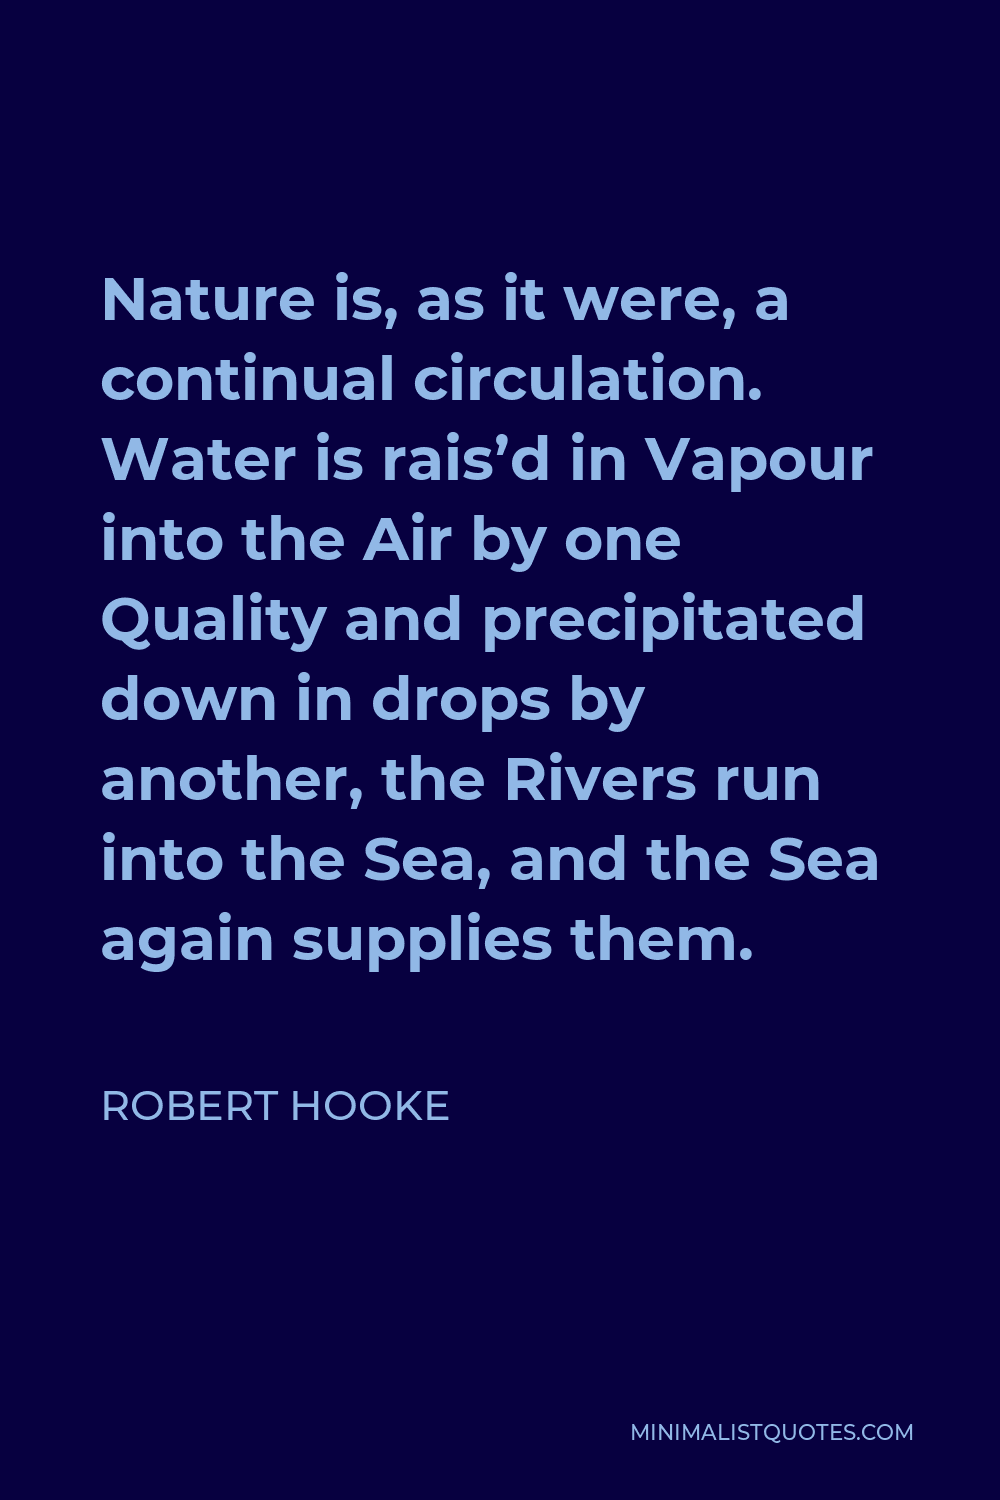 Robert Hooke Quote - Nature is, as it were, a continual circulation. Water is rais’d in Vapour into the Air by one Quality and precipitated down in drops by another, the Rivers run into the Sea, and the Sea again supplies them.